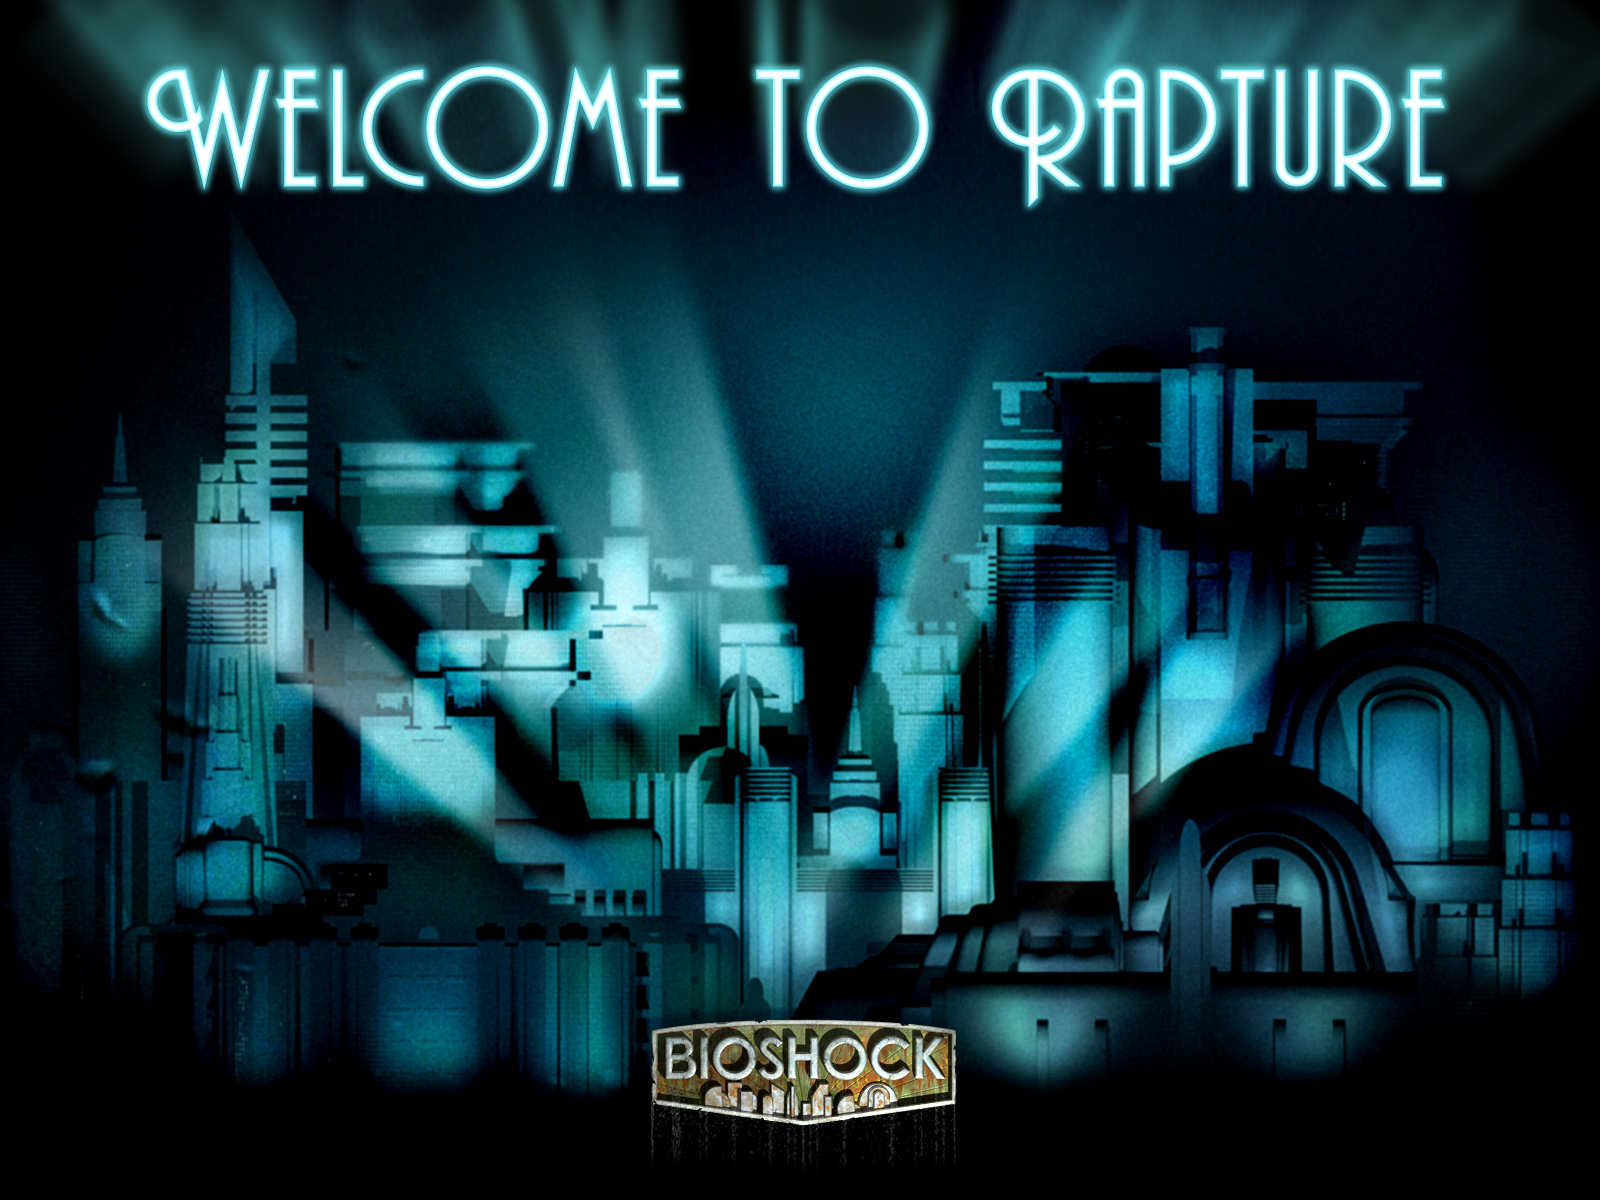 Rapture (Bioshock) HD Wallpapers and Backgrounds